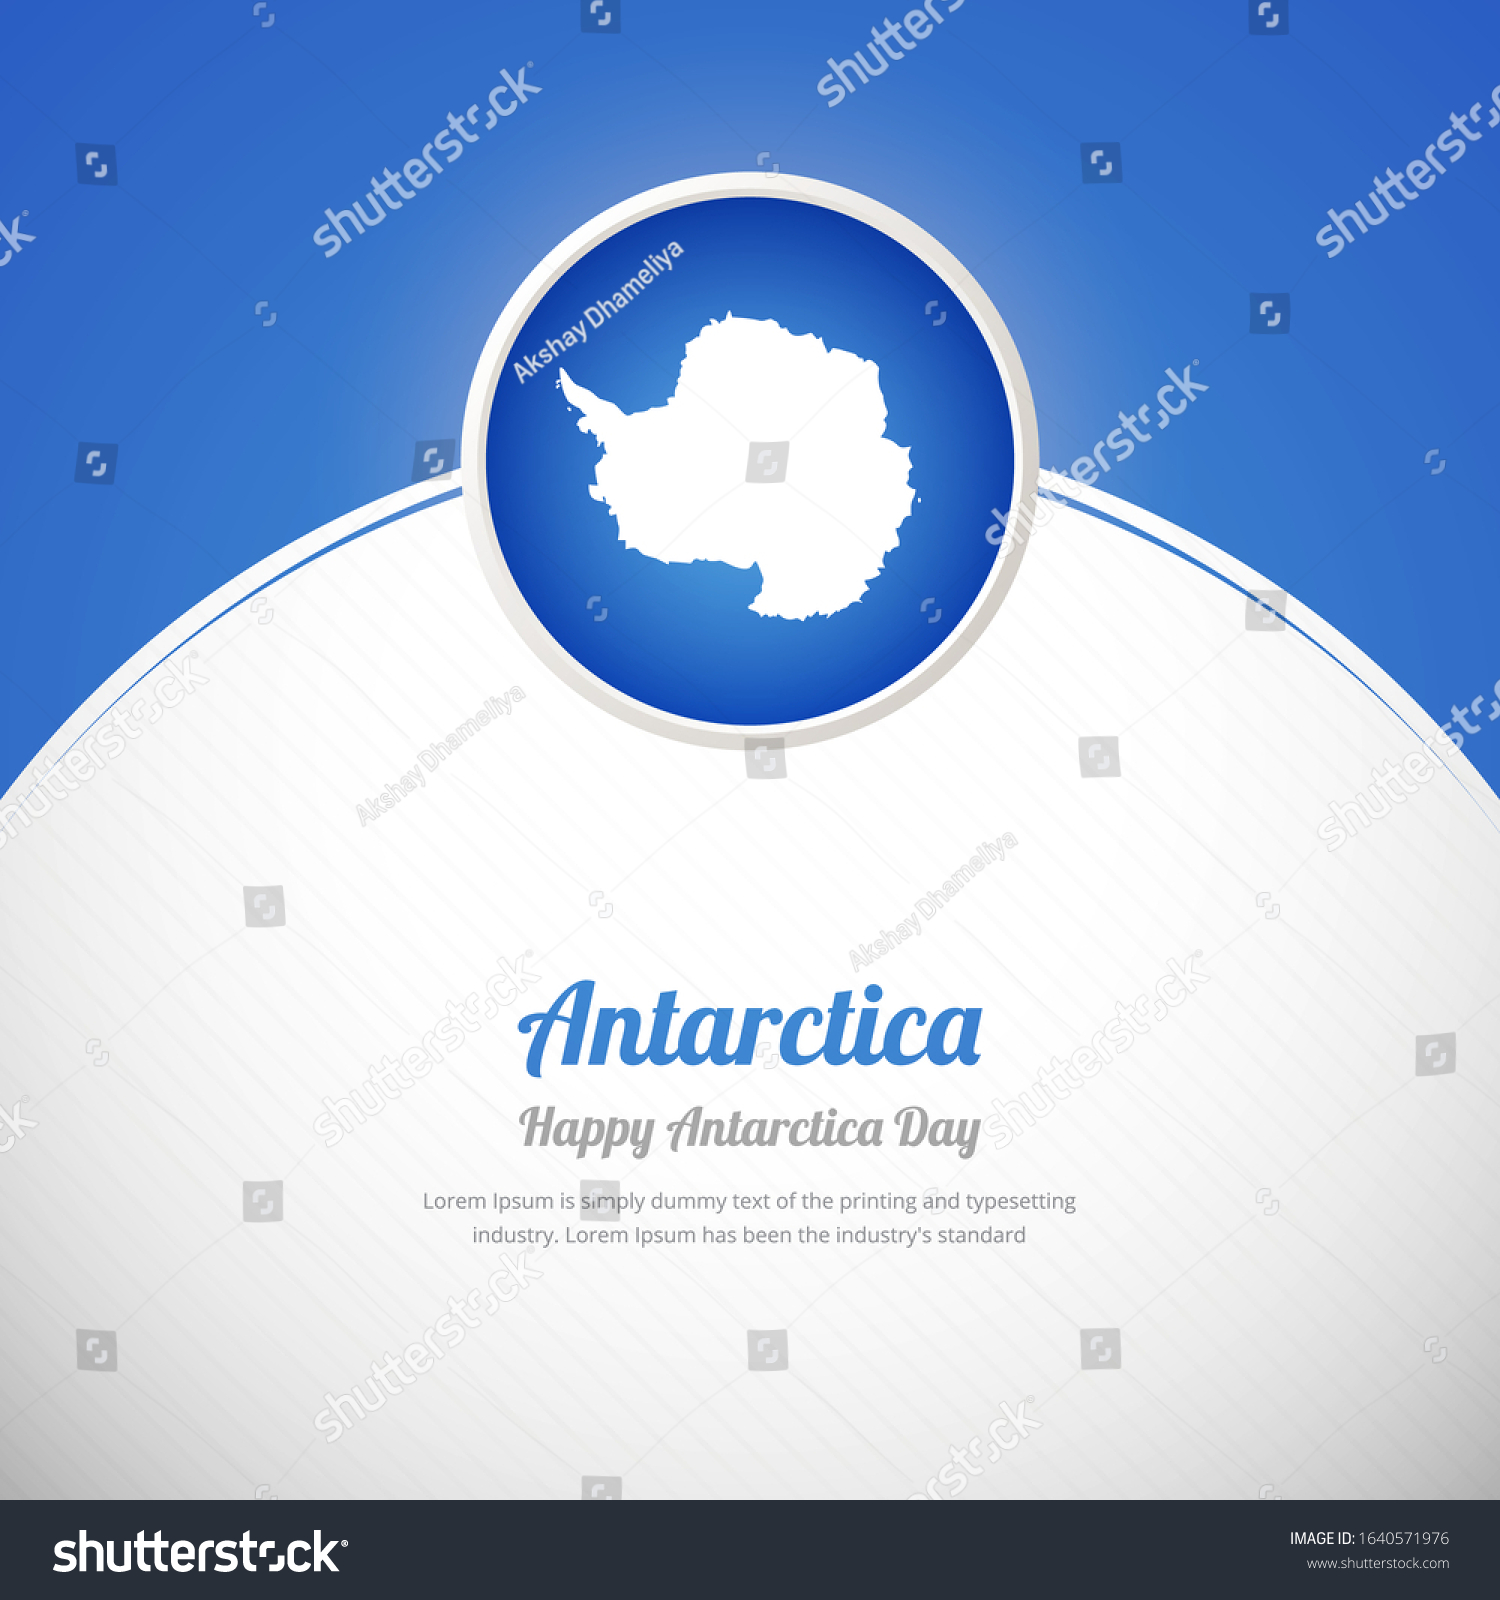 SVG of Happy Antarctica Day with creative colorful country flag background svg